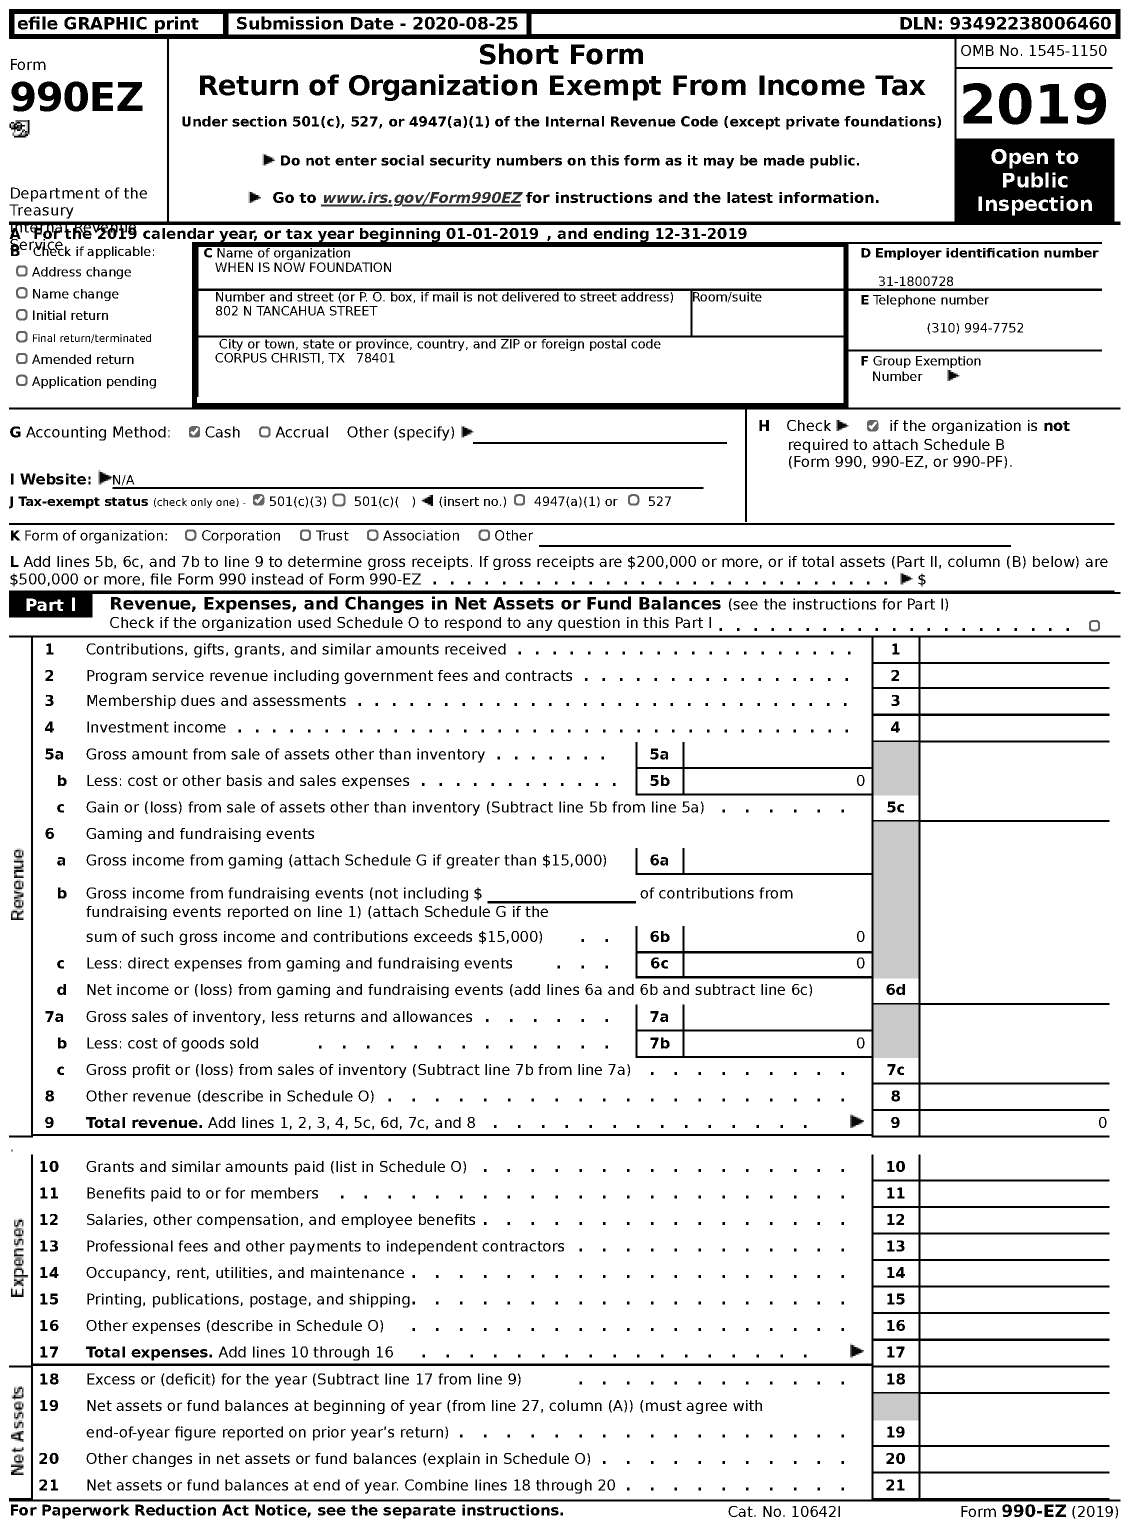 Image of first page of 2019 Form 990EZ for When Is Now Foundation